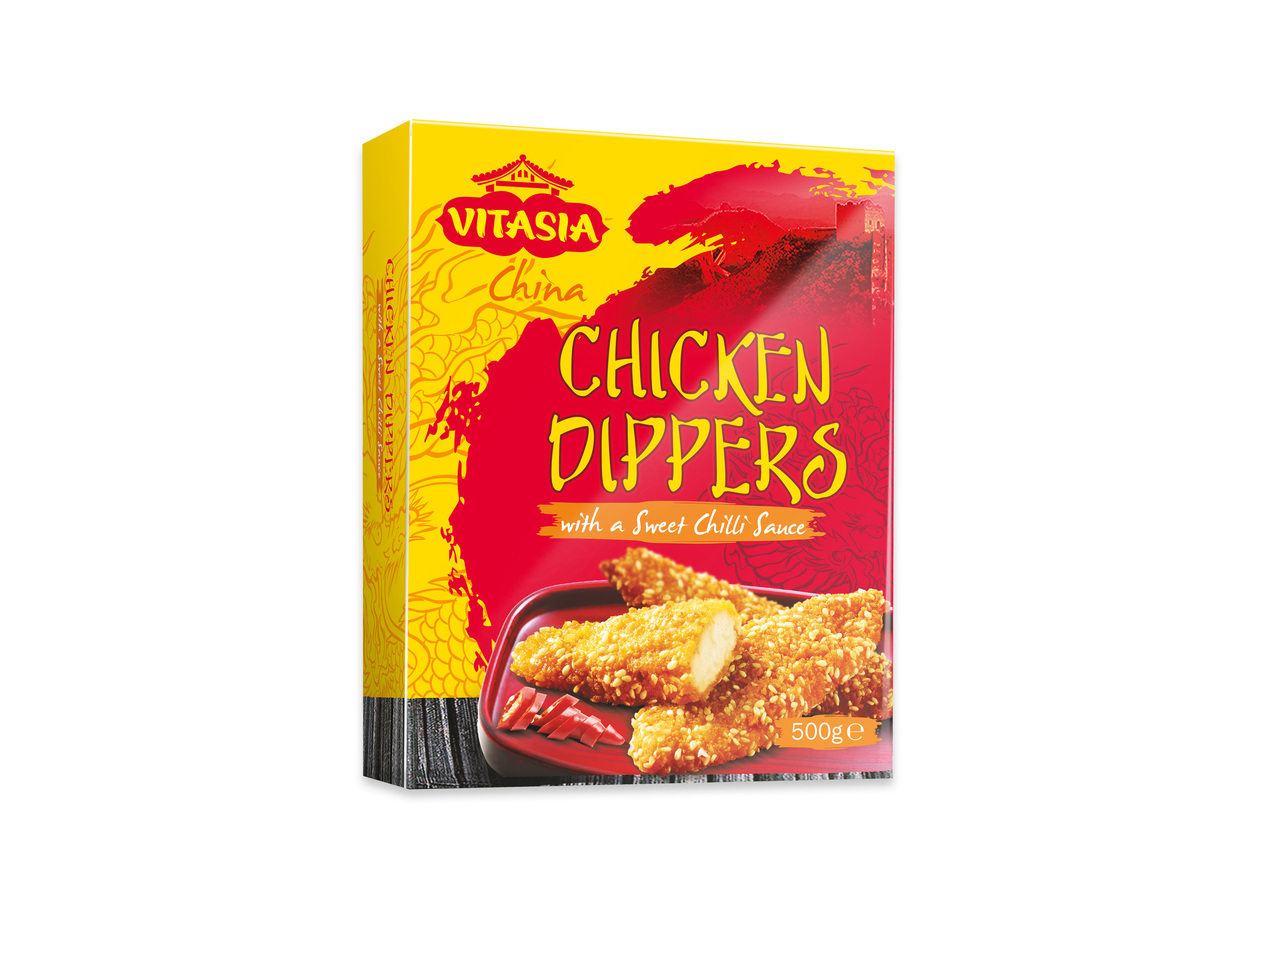 CHICKEN DIPPERS